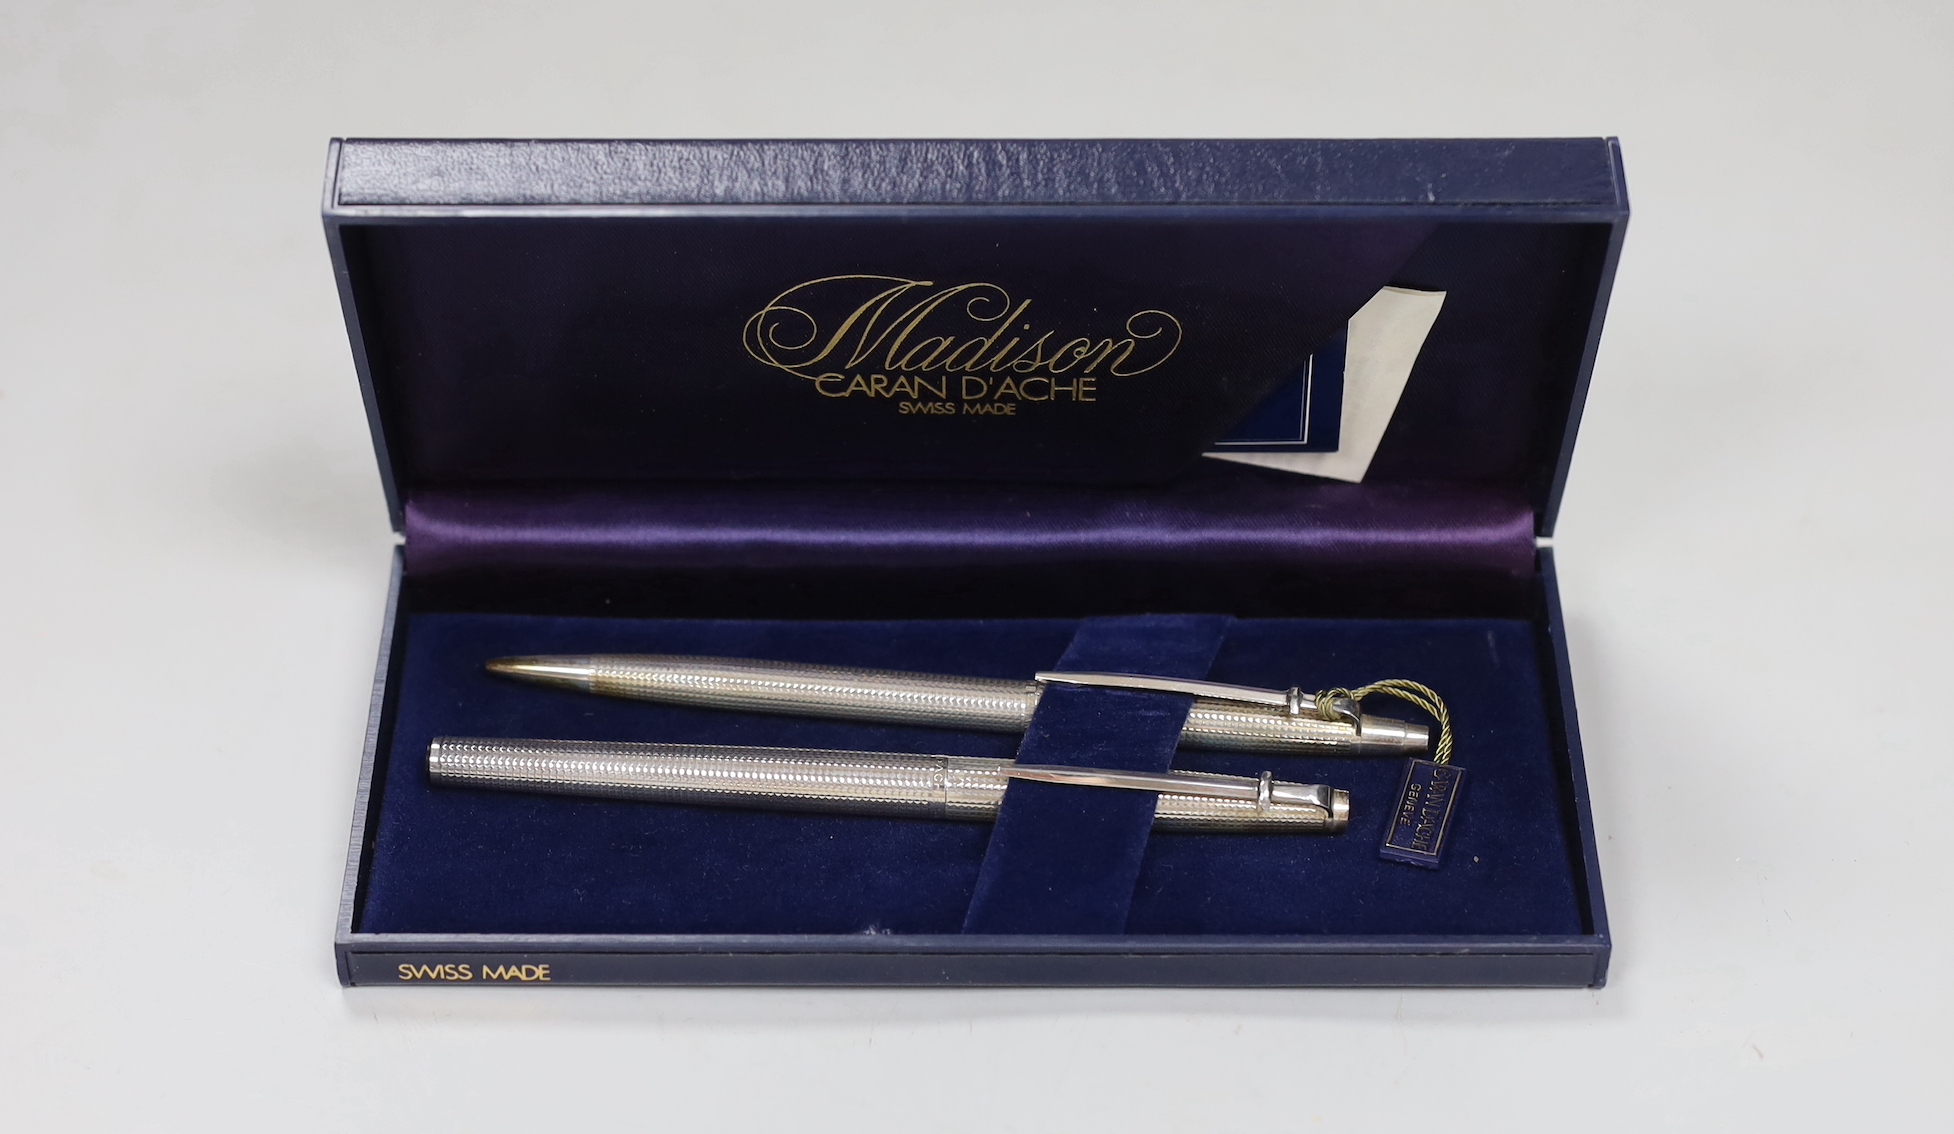 A cased Madison silver pen and pencil                                                                                                                                                                                       